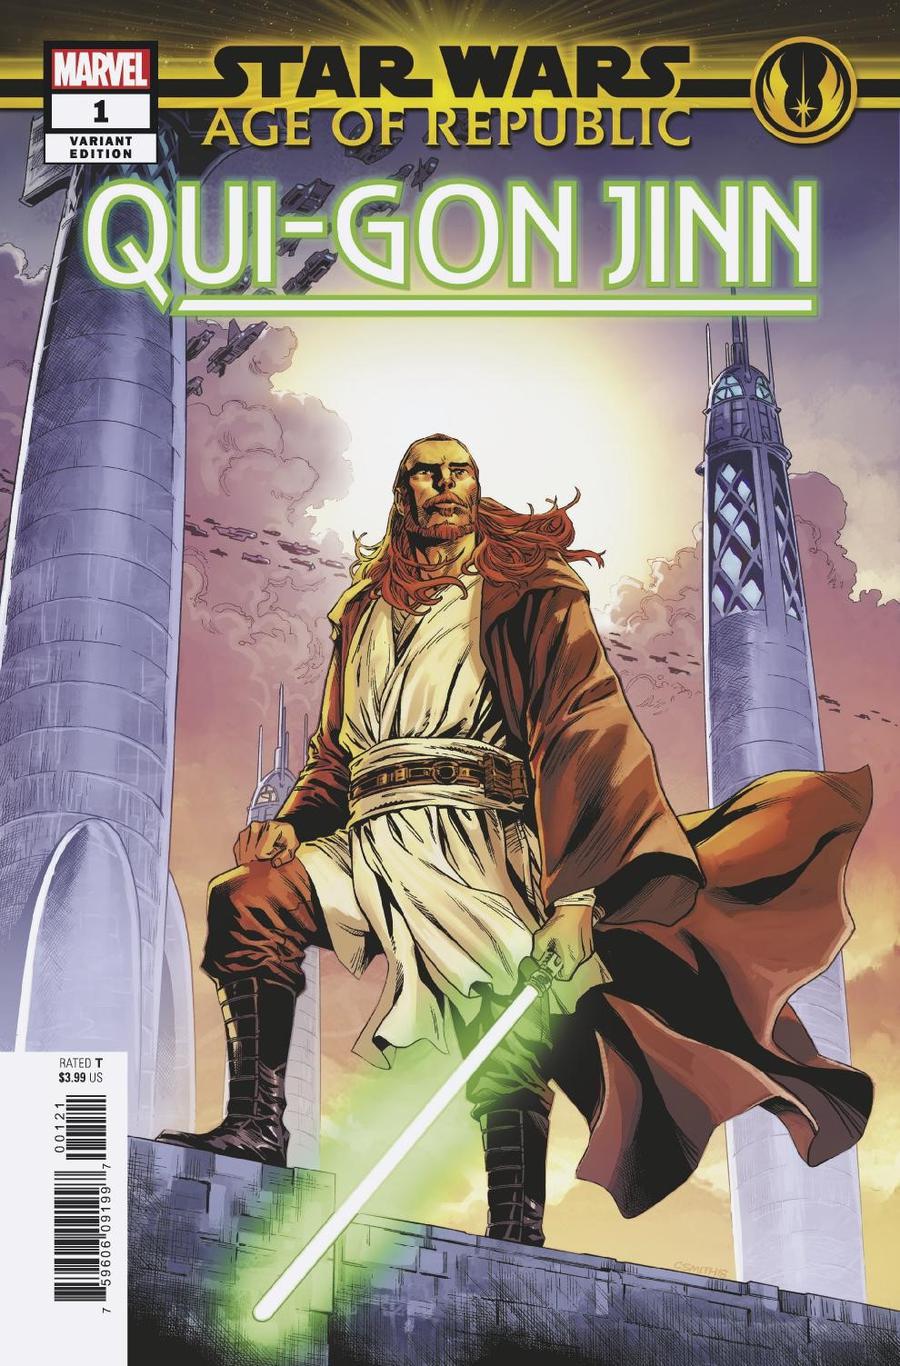 Star Wars Age Of Republic Qui-Gon Jinn #1 Cover B Variant Cory Smith Cover